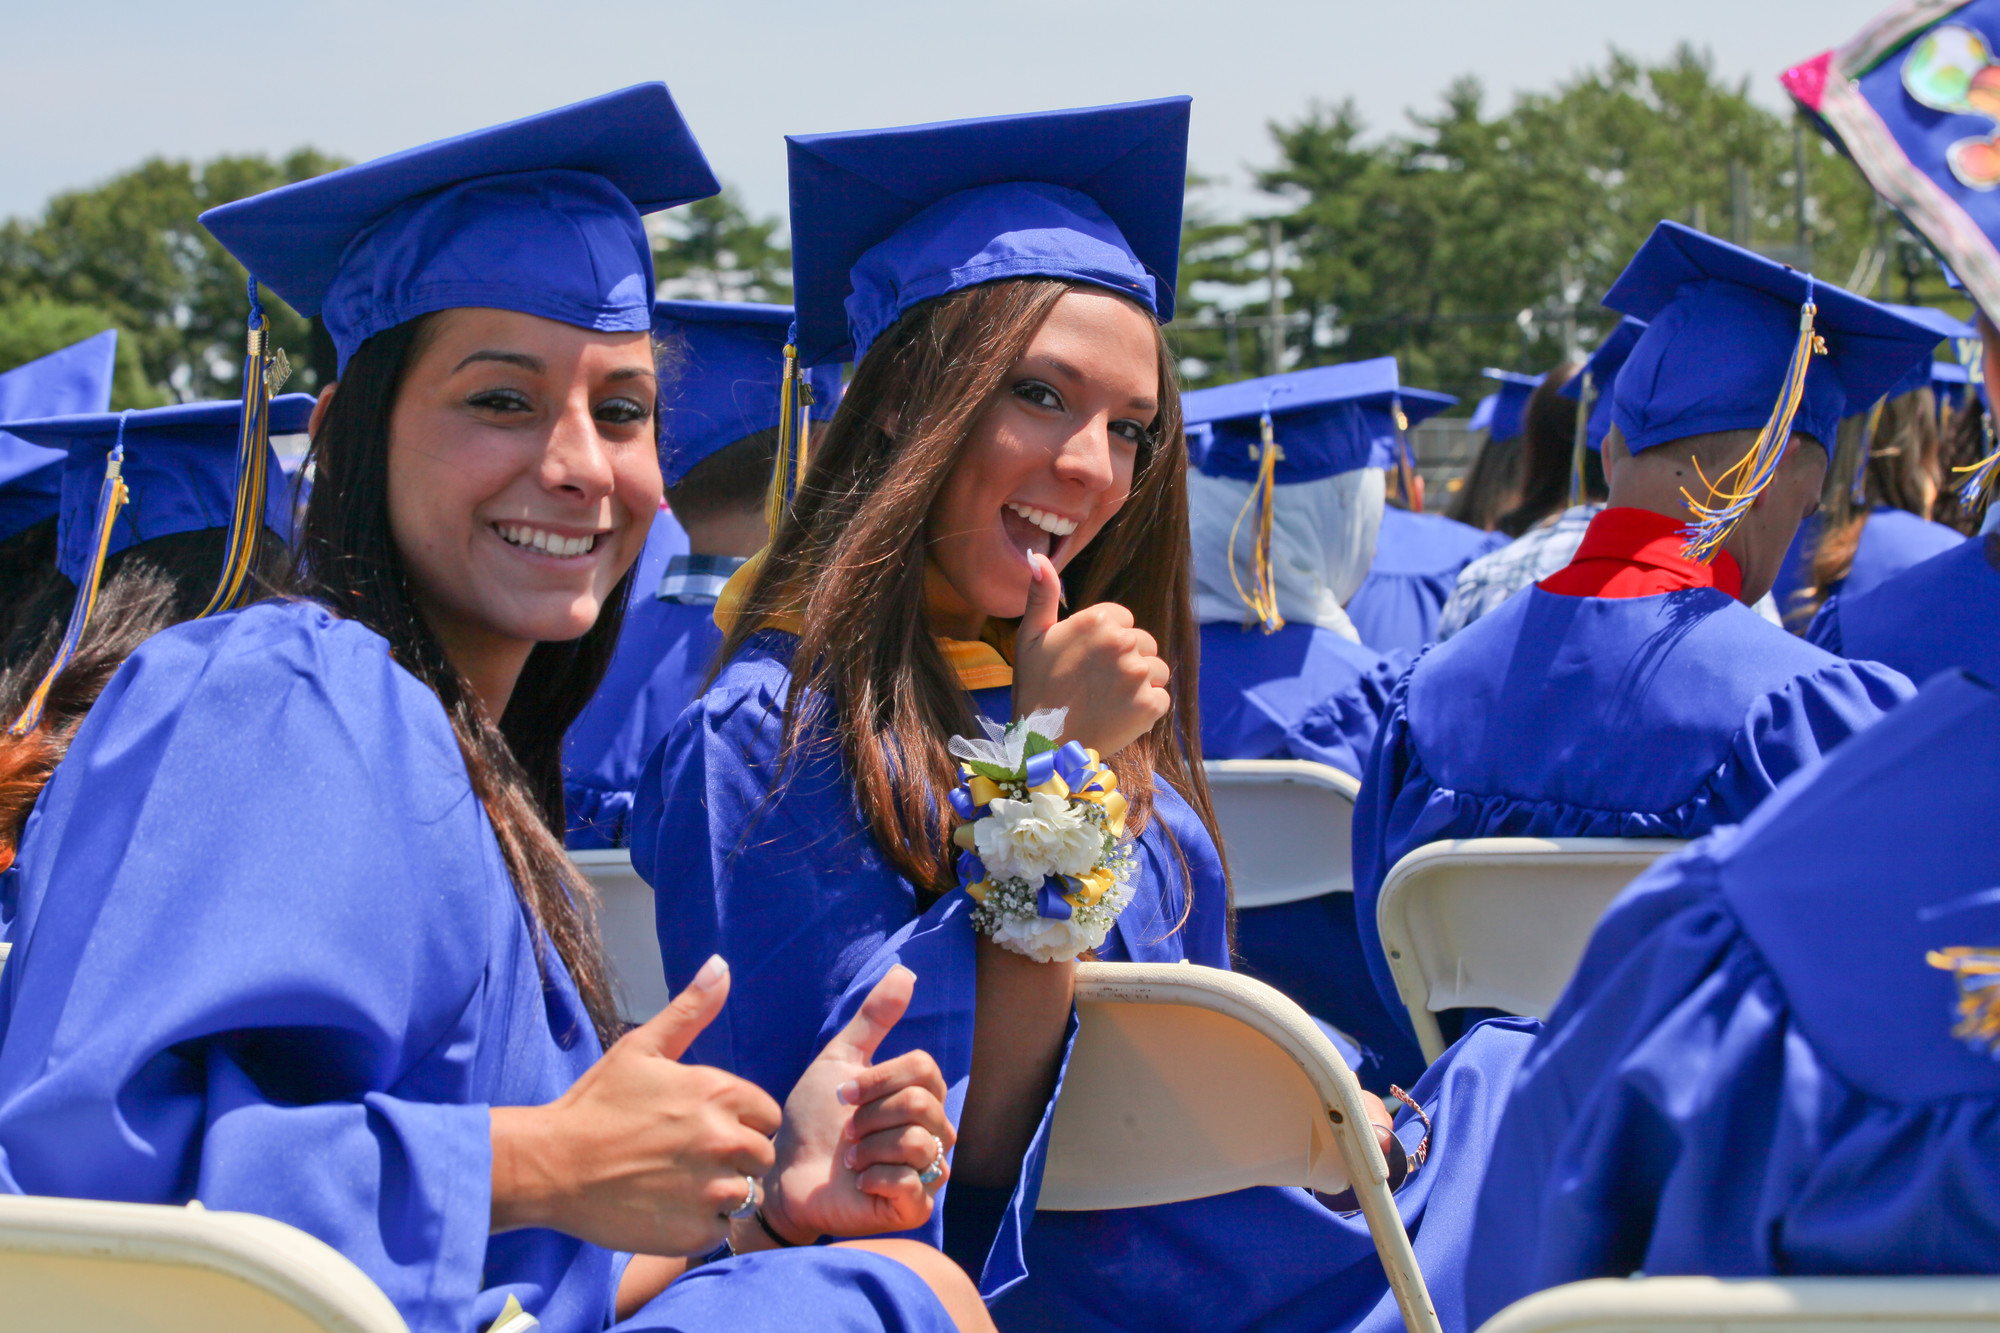 Amanda Soldano and Erin Masso were excited to graduate from East Meadow High School.